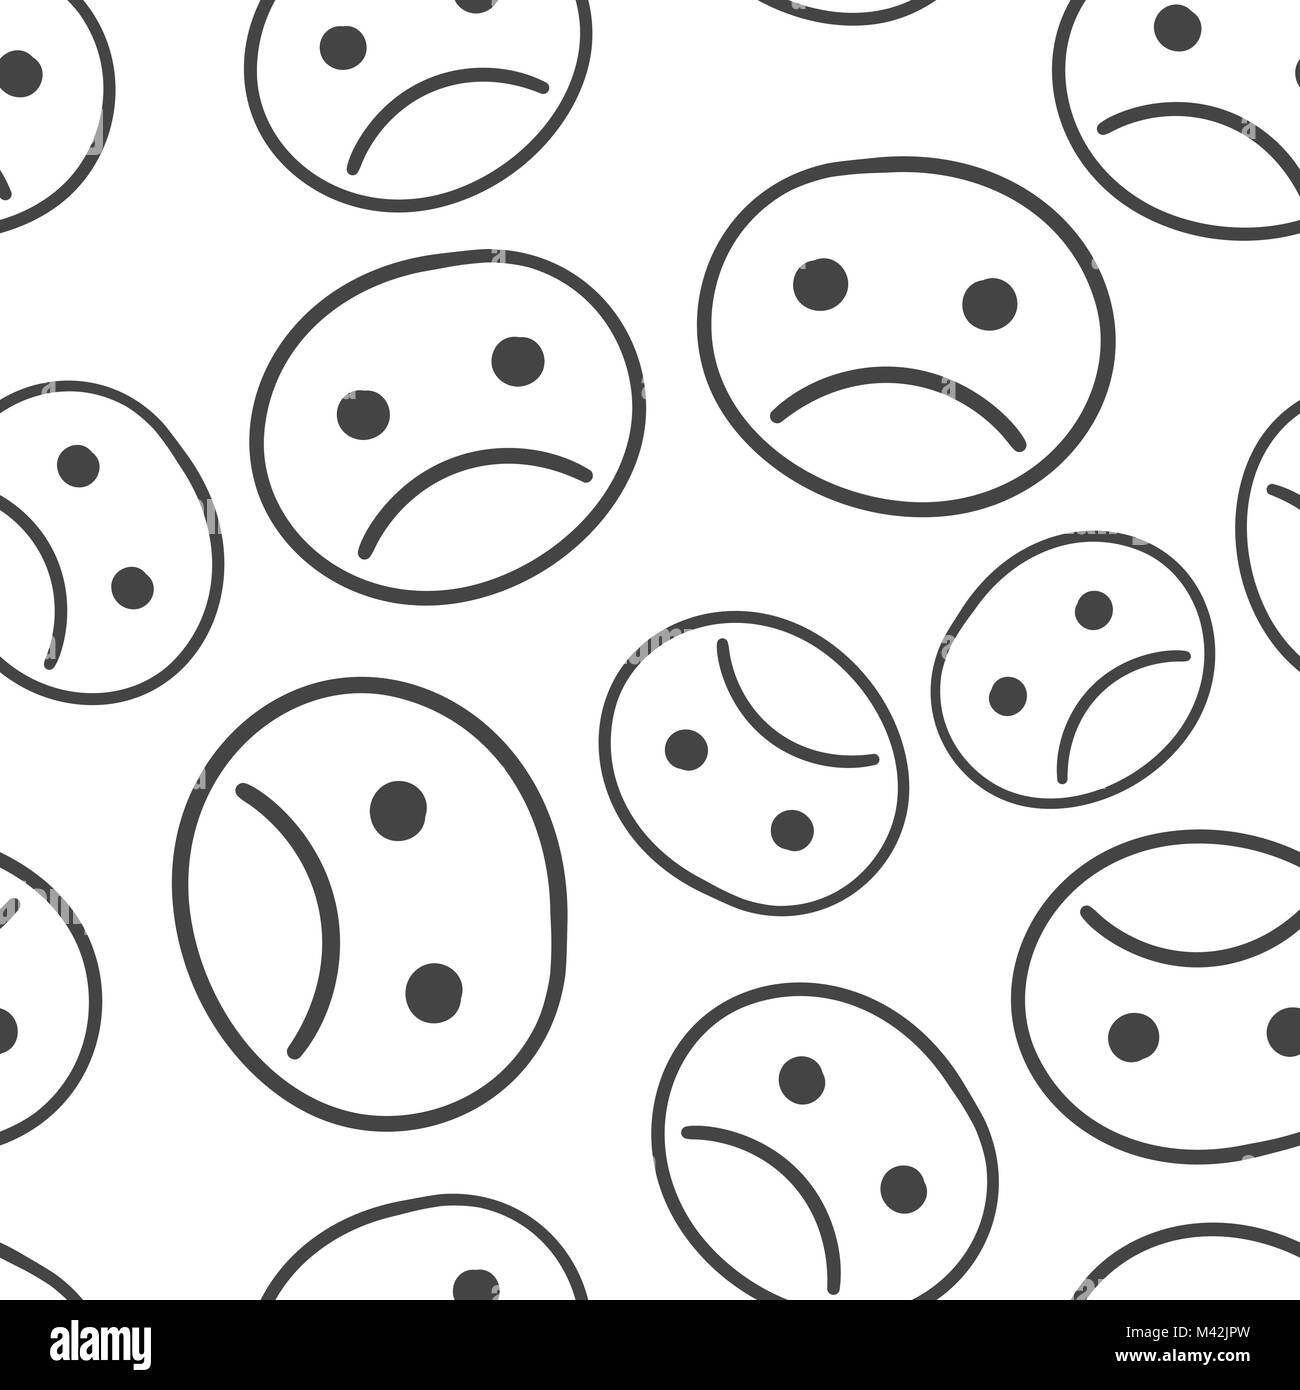 Hand drawn smiley face seamless pattern background. Business flat vector illustration. Face with sad sign symbol pattern. Stock Vector